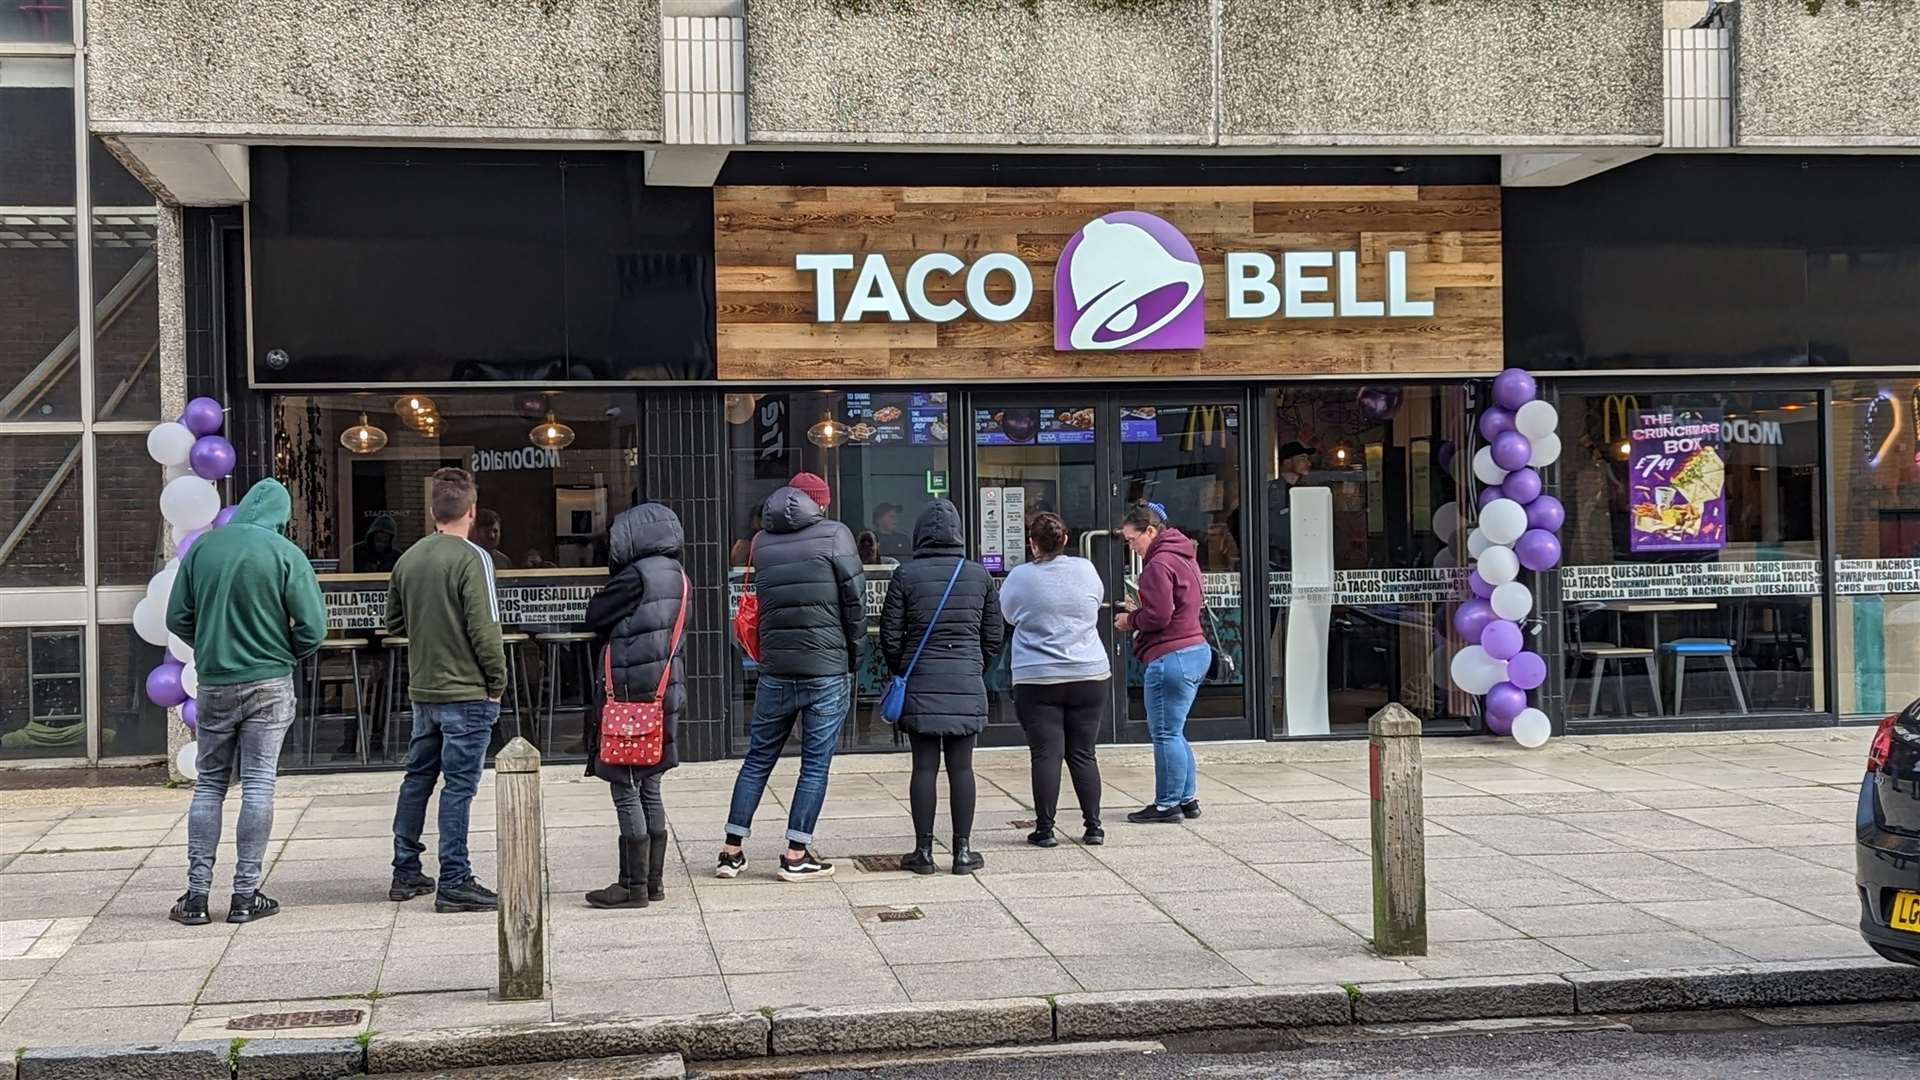 The wind was whipping along West Terrace, in Folkestone, as punters eagerly awaited the opening of the town's new Taco Bell